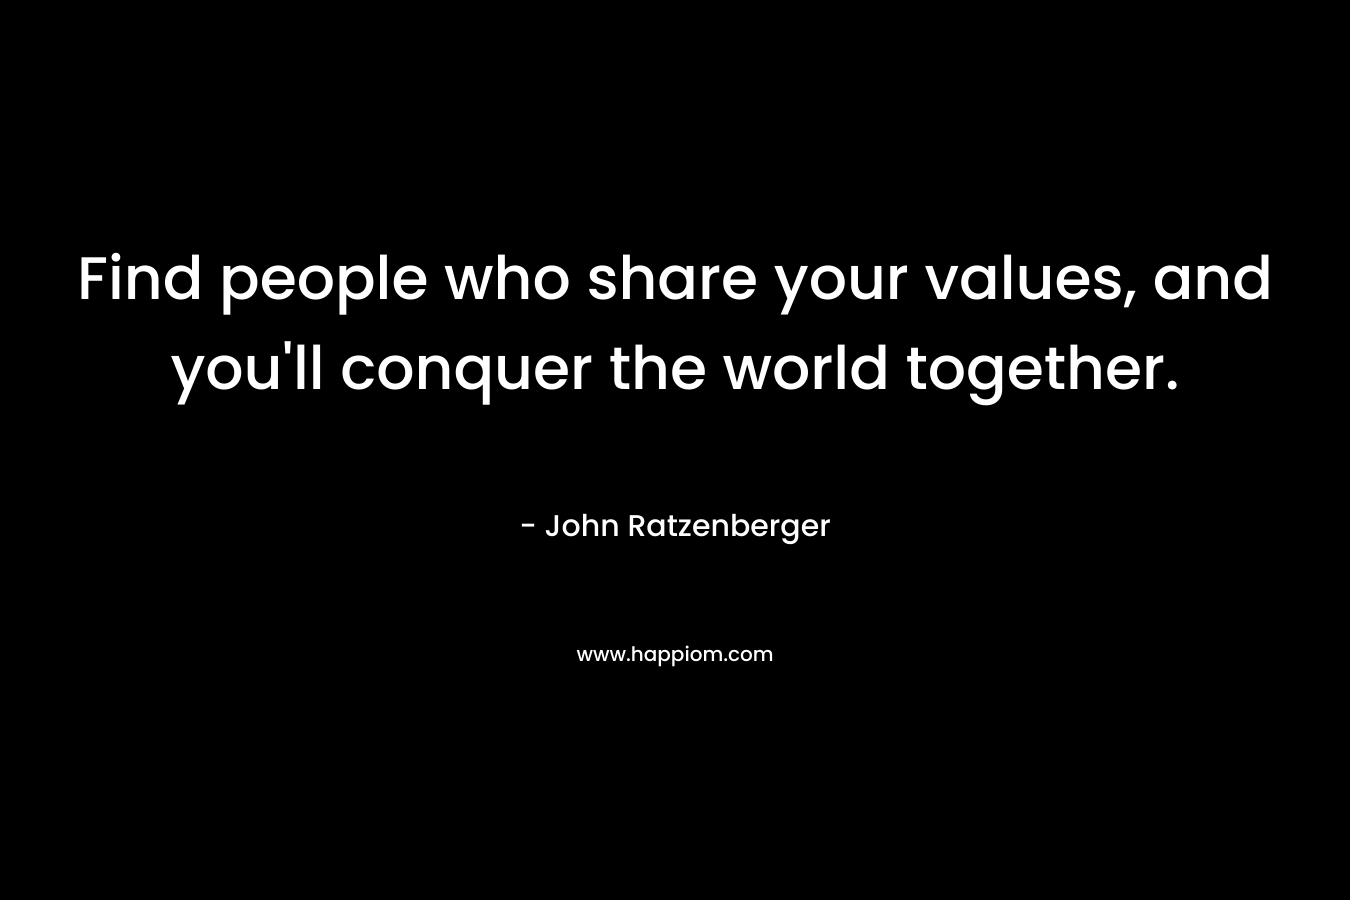 Find people who share your values, and you’ll conquer the world together. – John Ratzenberger